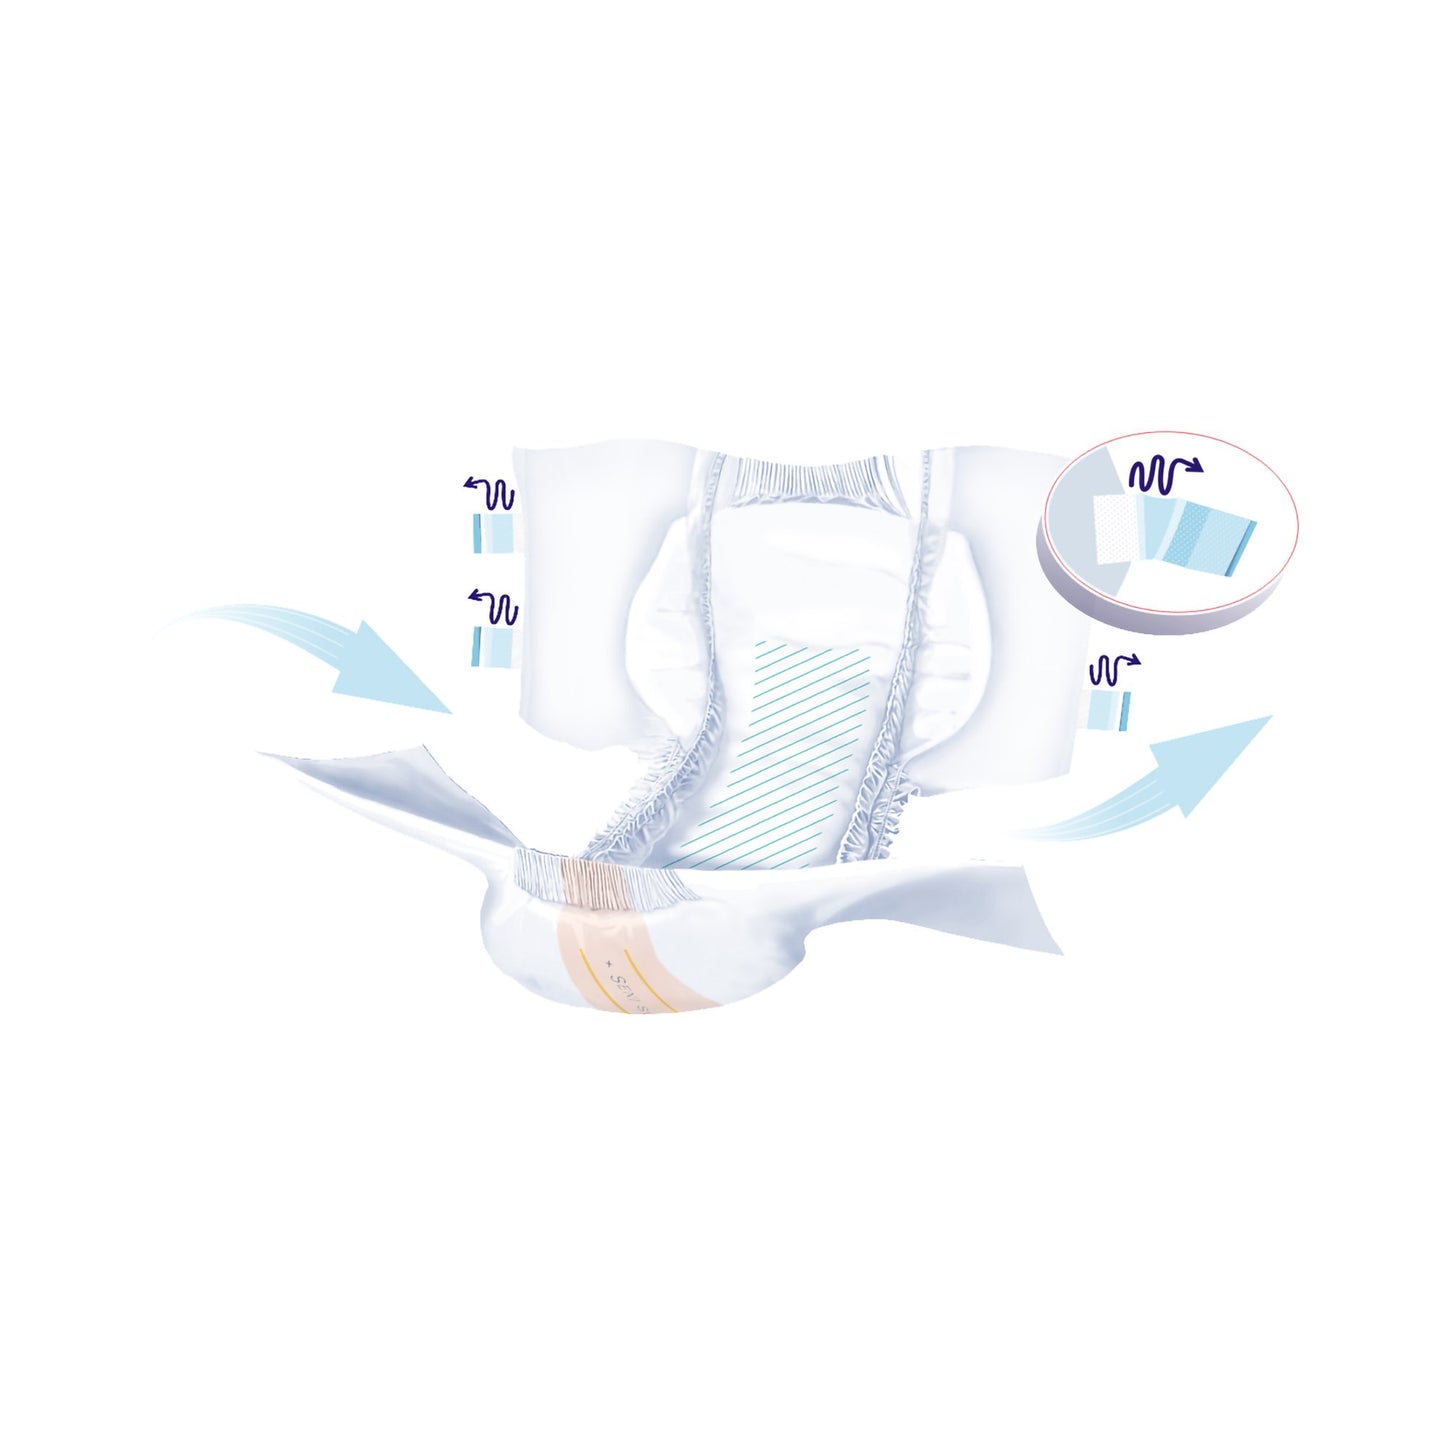 Seni® Super Heavy Absorbency Incontinence Brief, XL, 25 ct